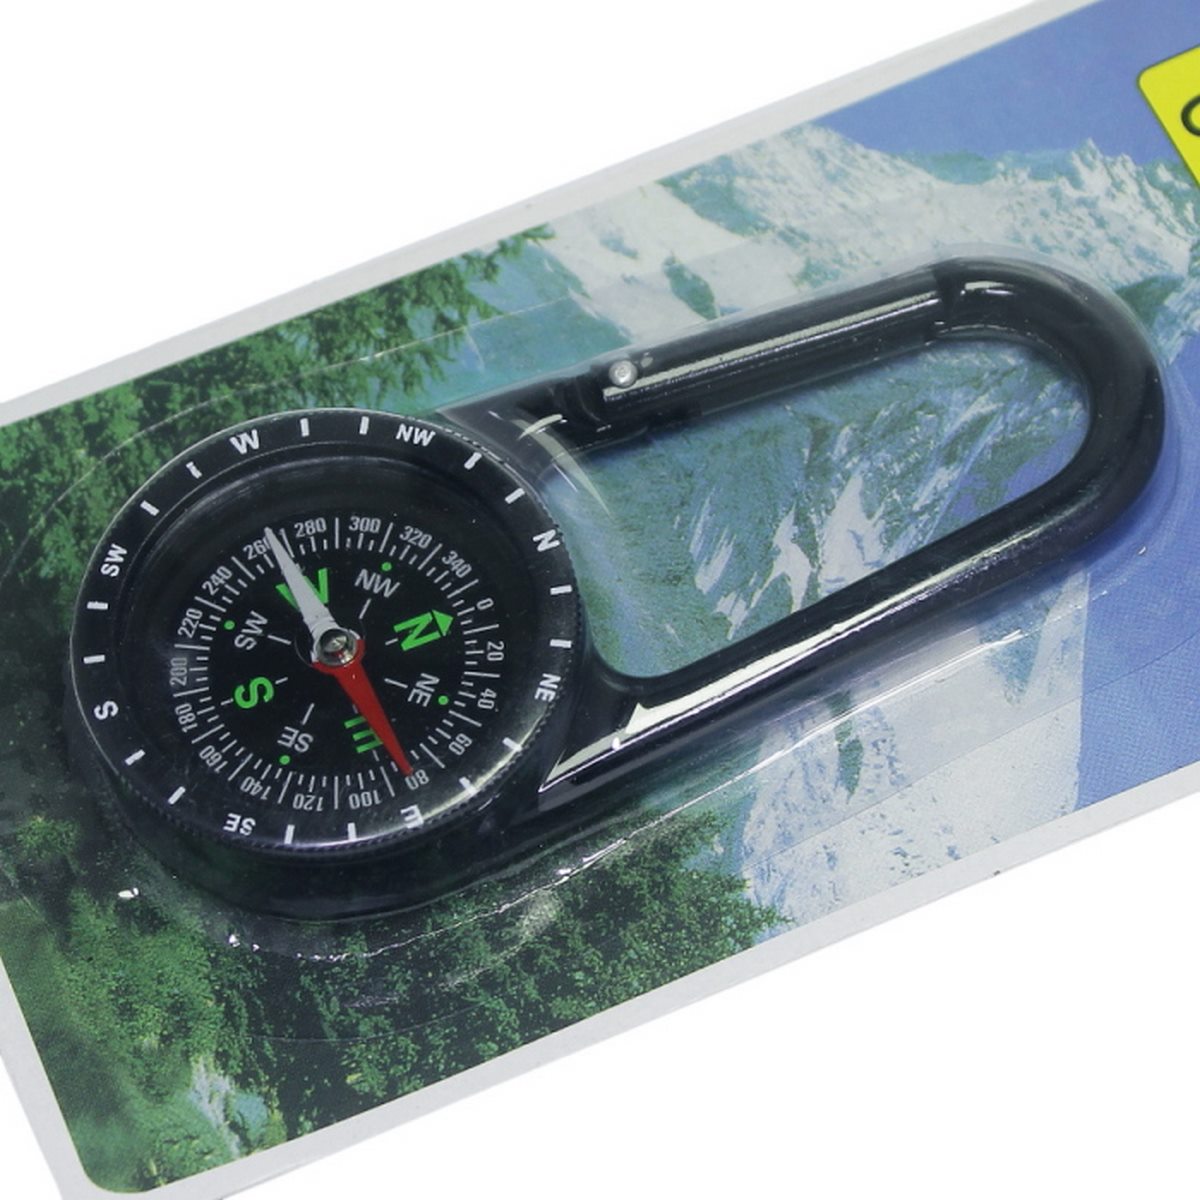 2in1 Magnetic Compass - For Corporate Gifting, Event or Exhibition Freebies, Promotional Item, Return Gift JADC40T